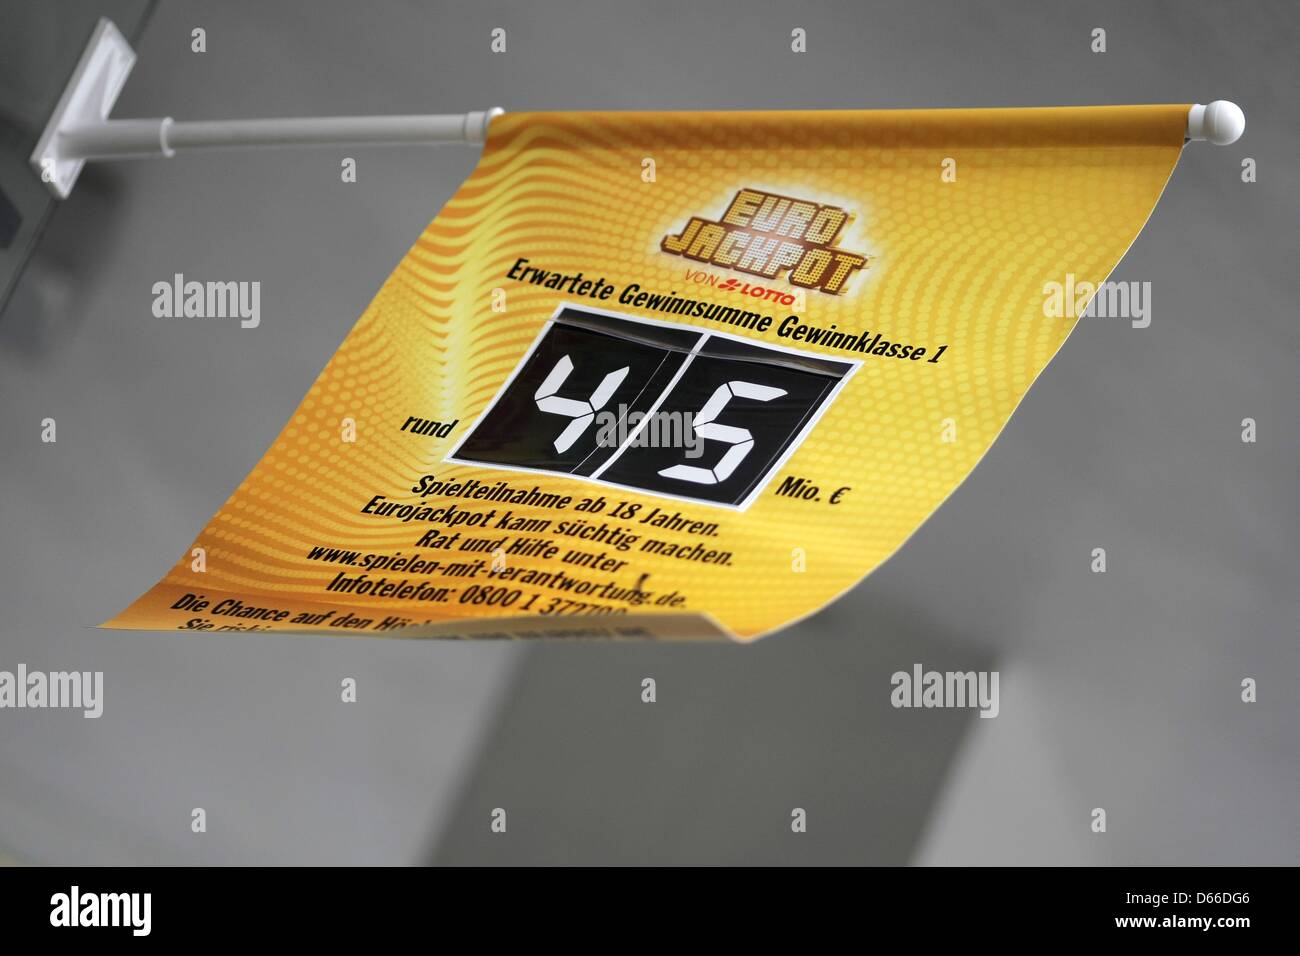 A flag displays the expected Euro Jackpot winning amount of 45 million  euros at a lottery business in Wiesbaden, Germany, 13 April 2013. The  winning numbers were drawn in Helsinki on 12